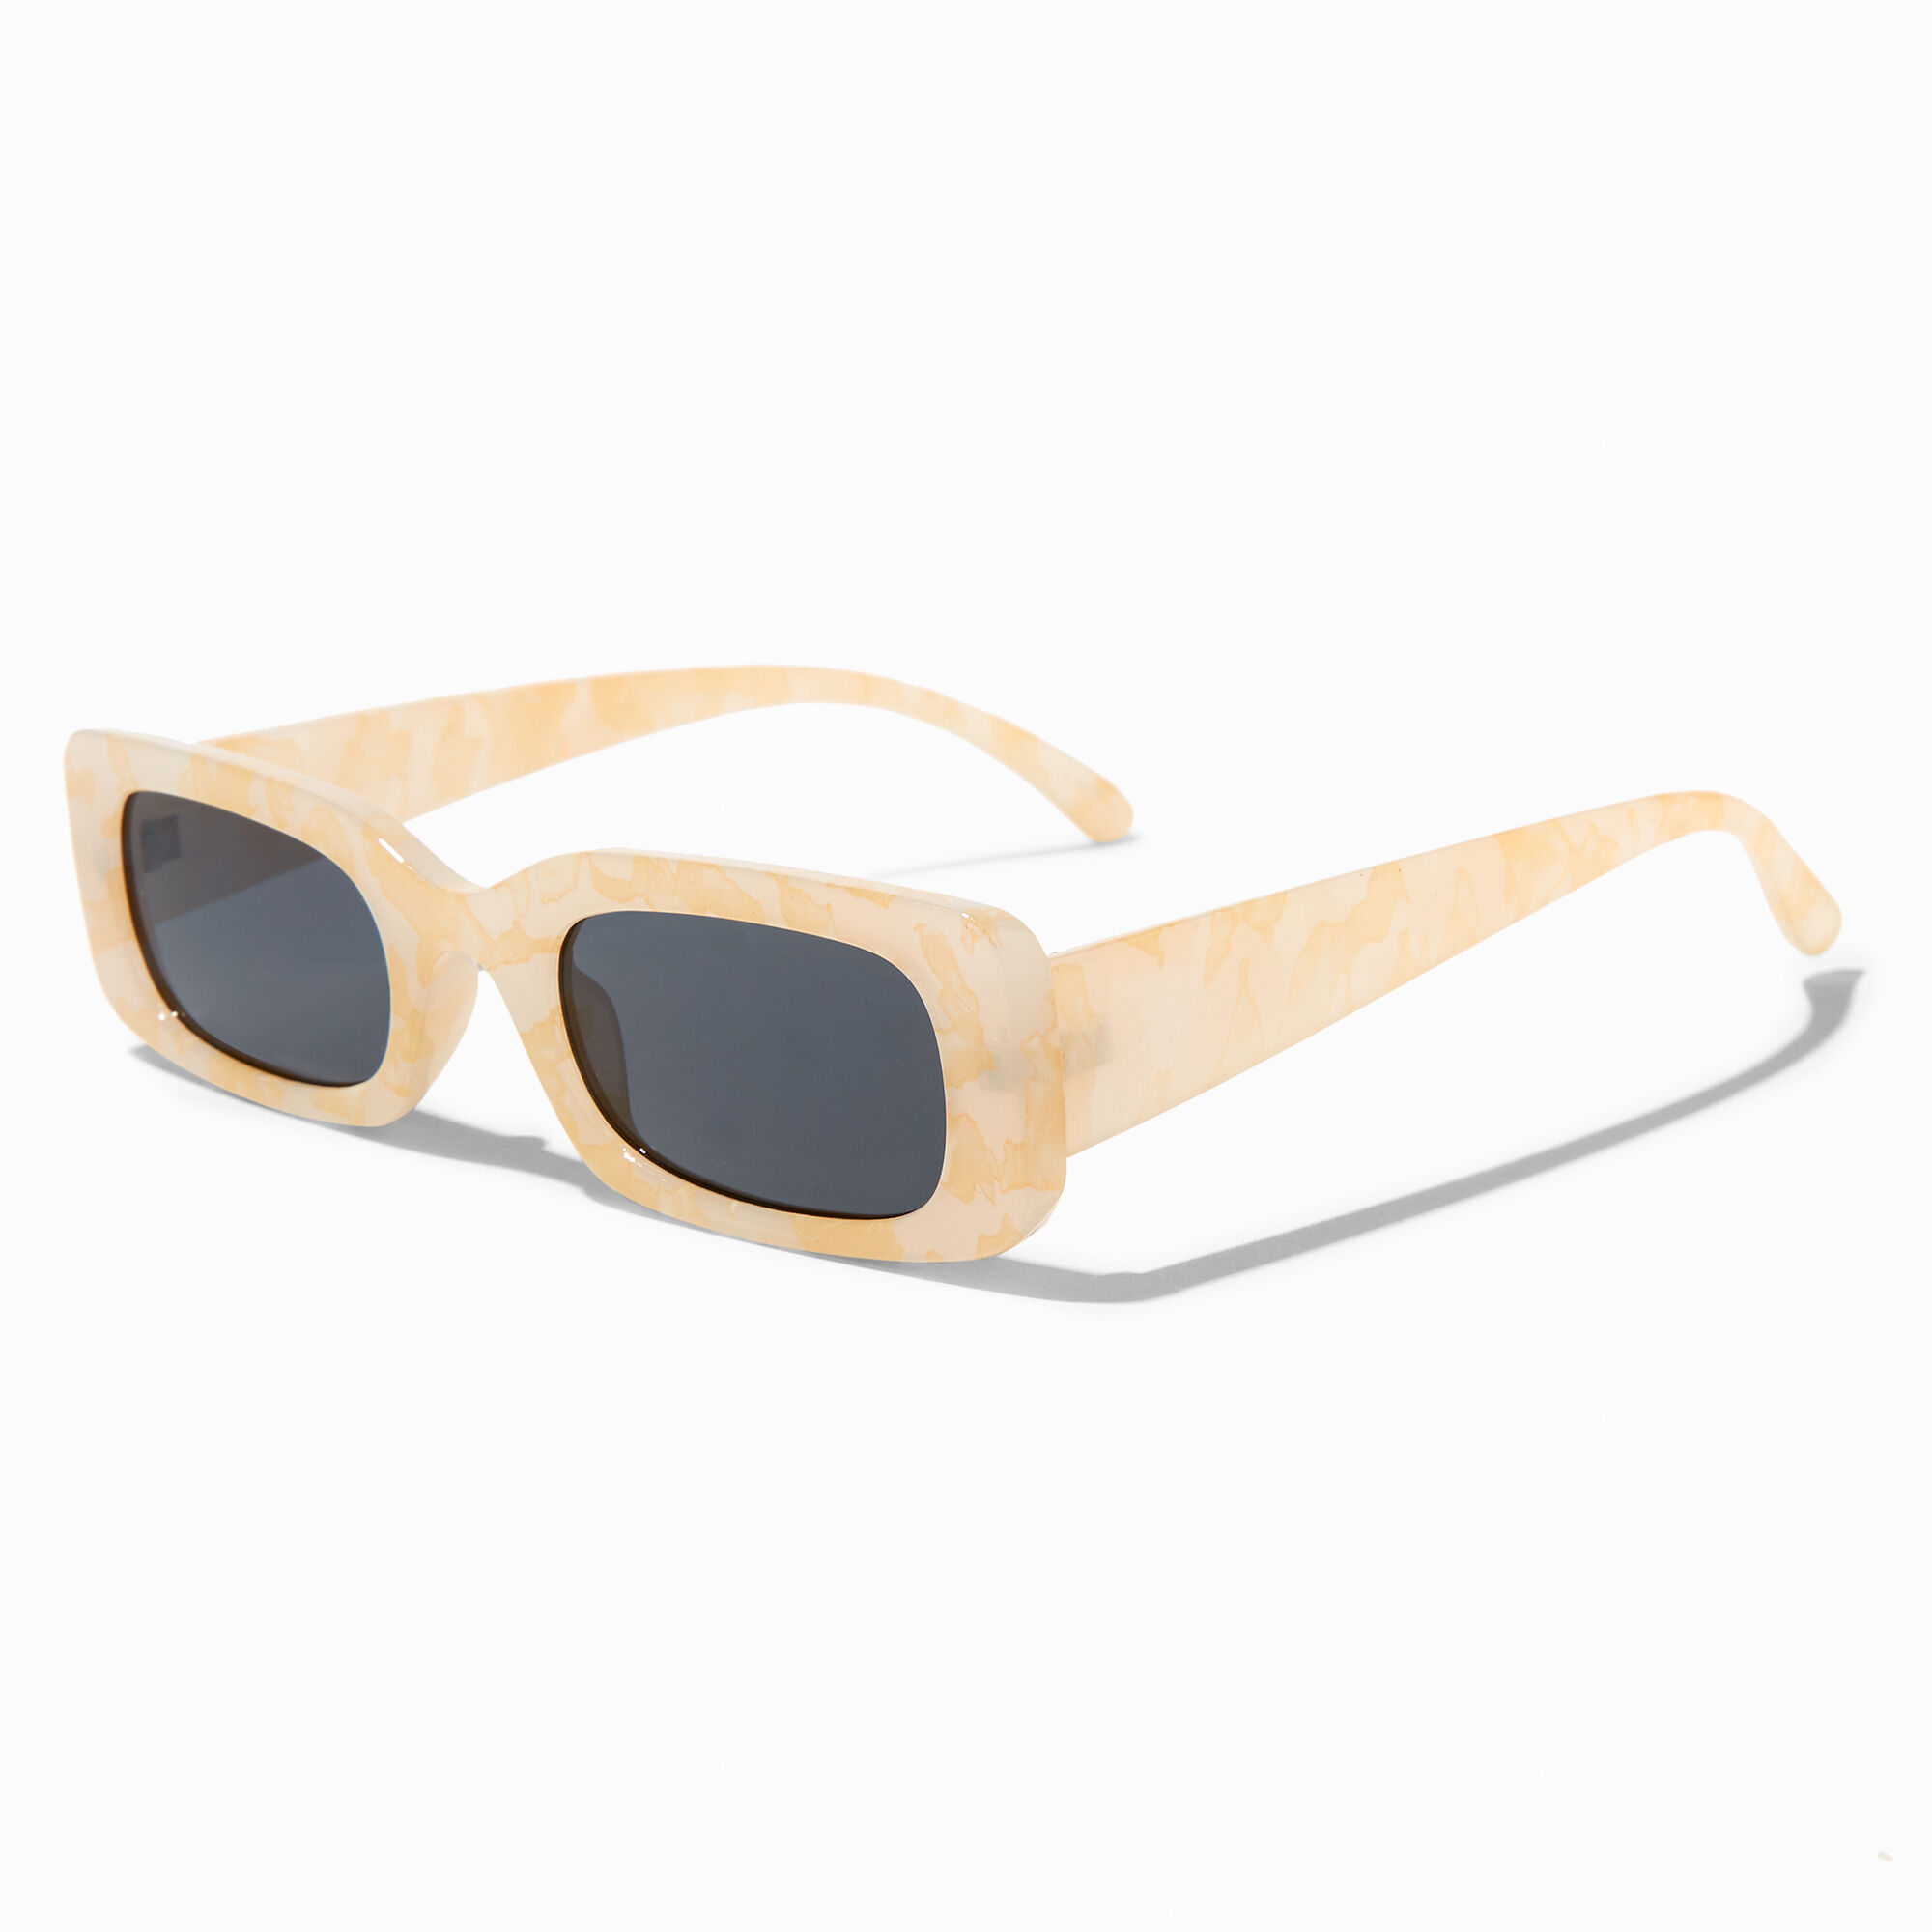 View Claires Chunky Recgle Sunglasses Cream Tan information